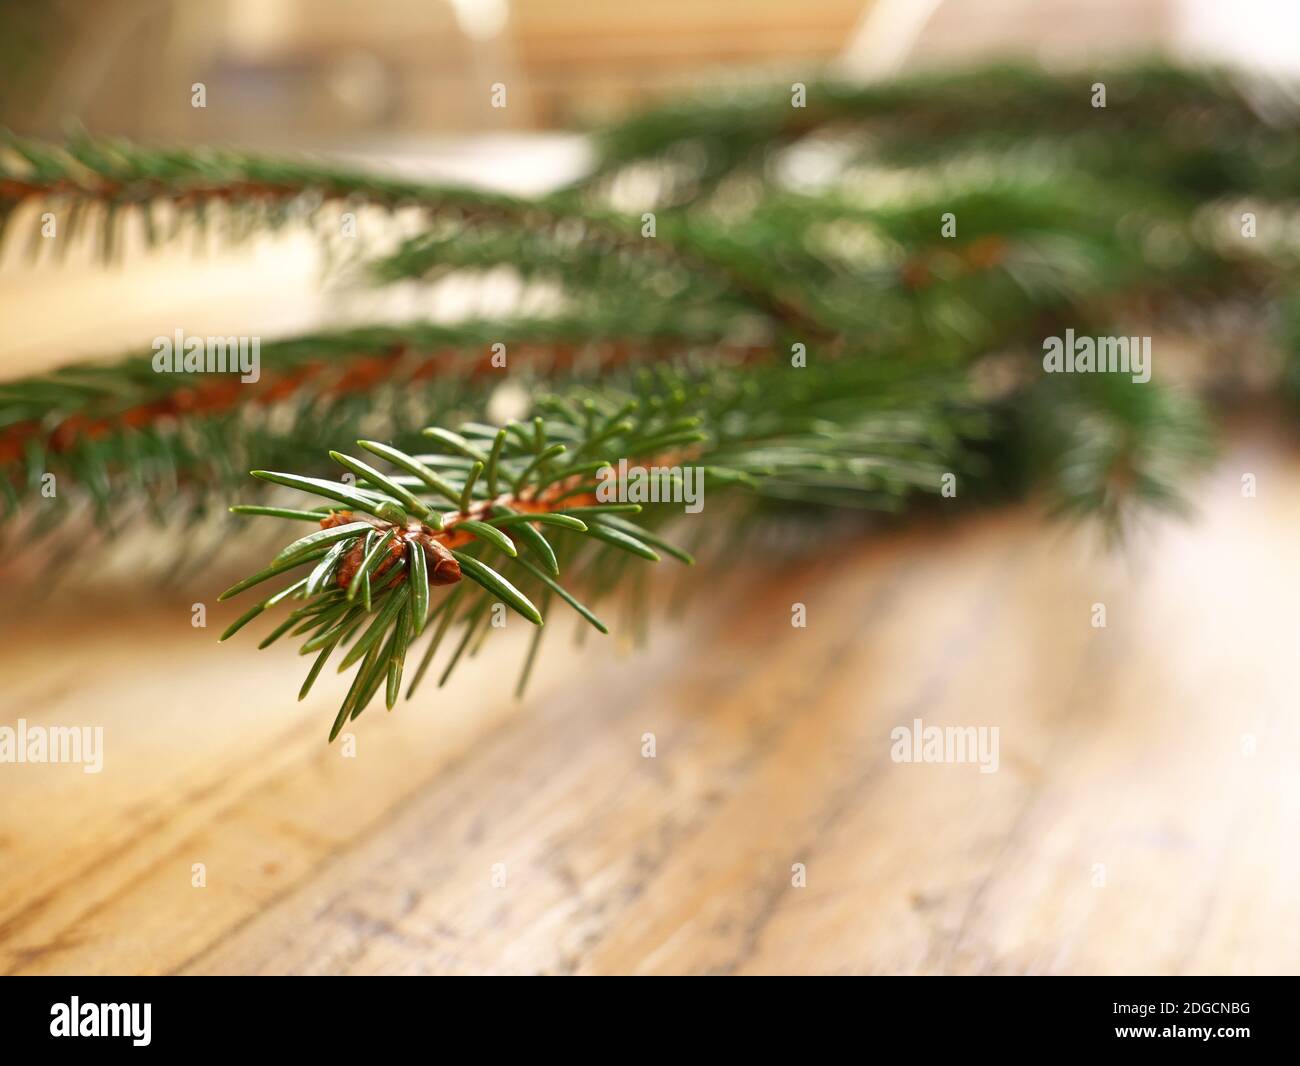 Close-up of a fir branch resting on a wooden table Stock Photo